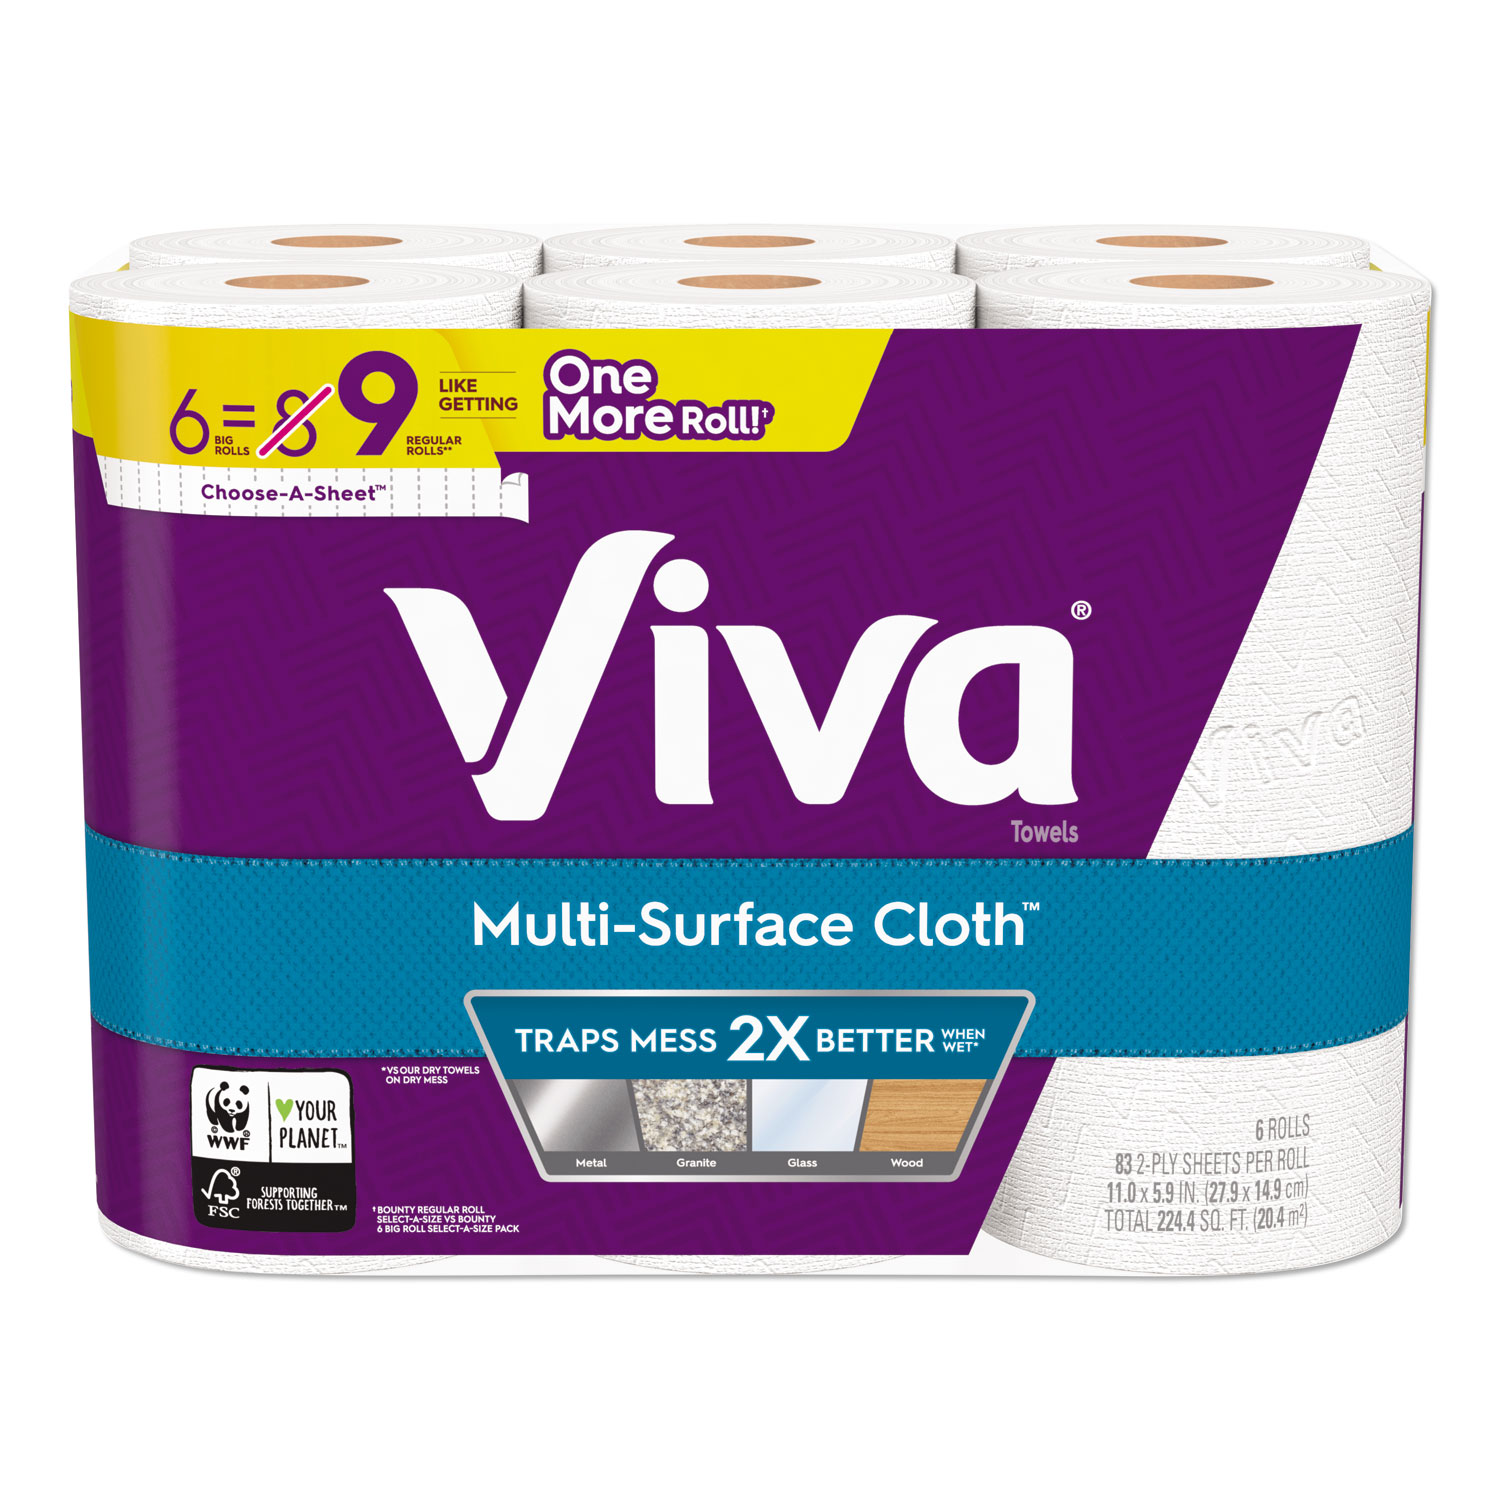  Viva 46708 Multi-Surface Cloth Choose-A-Sheet Paper Towels 1-Ply, 11 x 5.9, White, 83 Sheets/Roll, 6 Rolls/Pack, 4 Packs/Carton (KCC49413) 